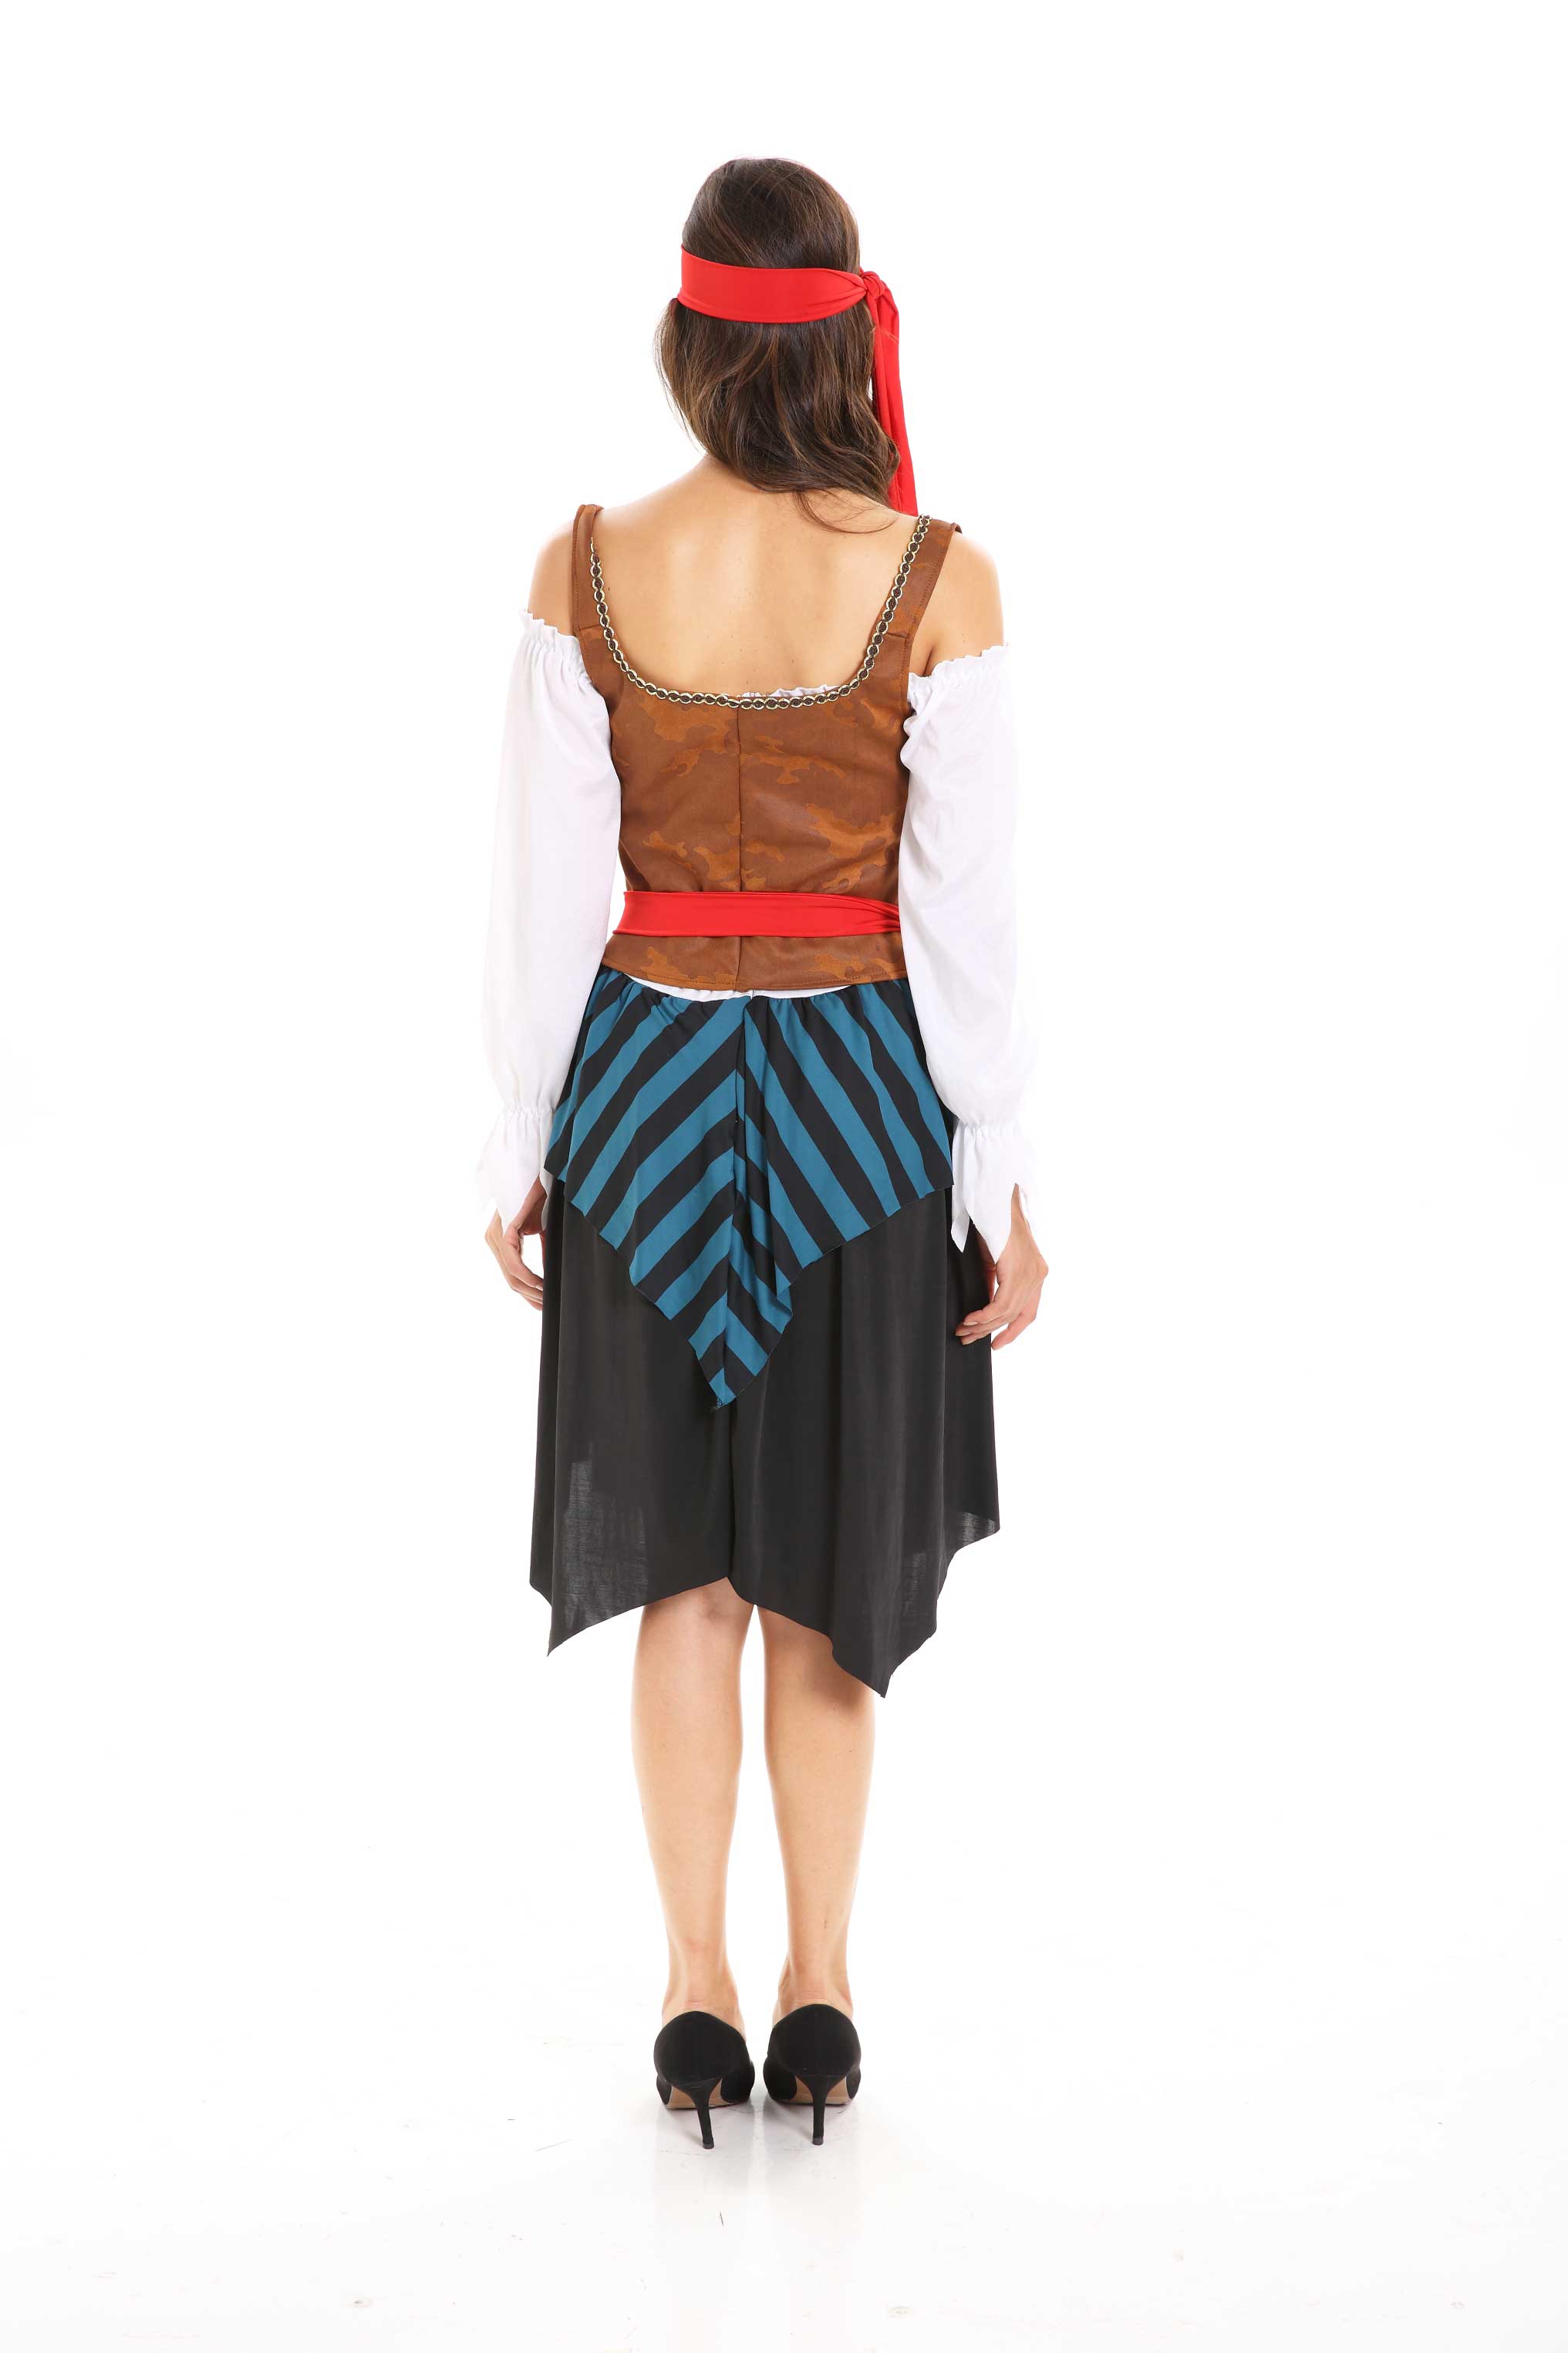 F1807 Adult Queen Of The High Seas Costume